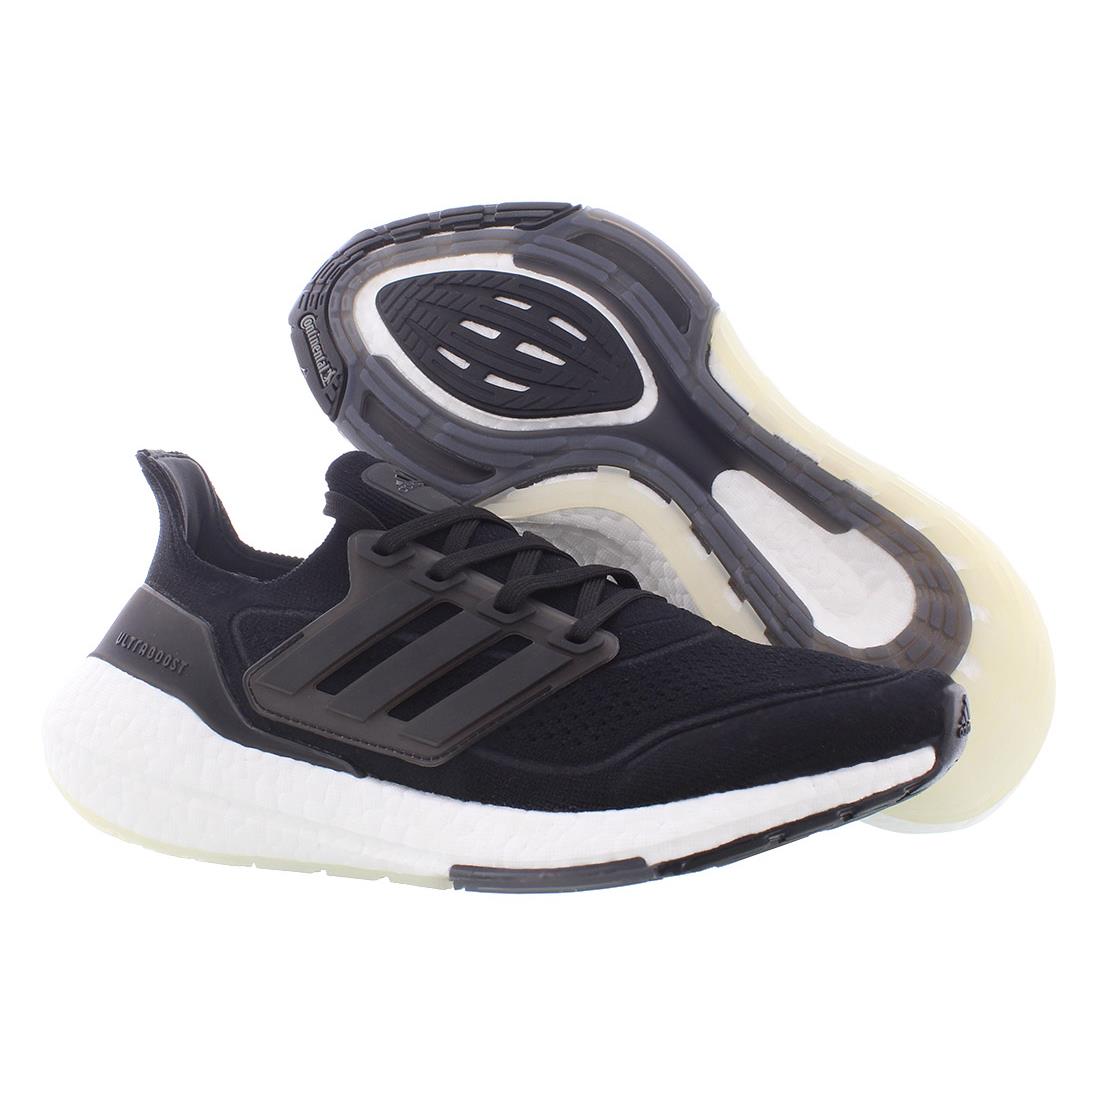 Adidas Ultraboost 21 Womens Shoes Size 8 Color: Black/black/grey